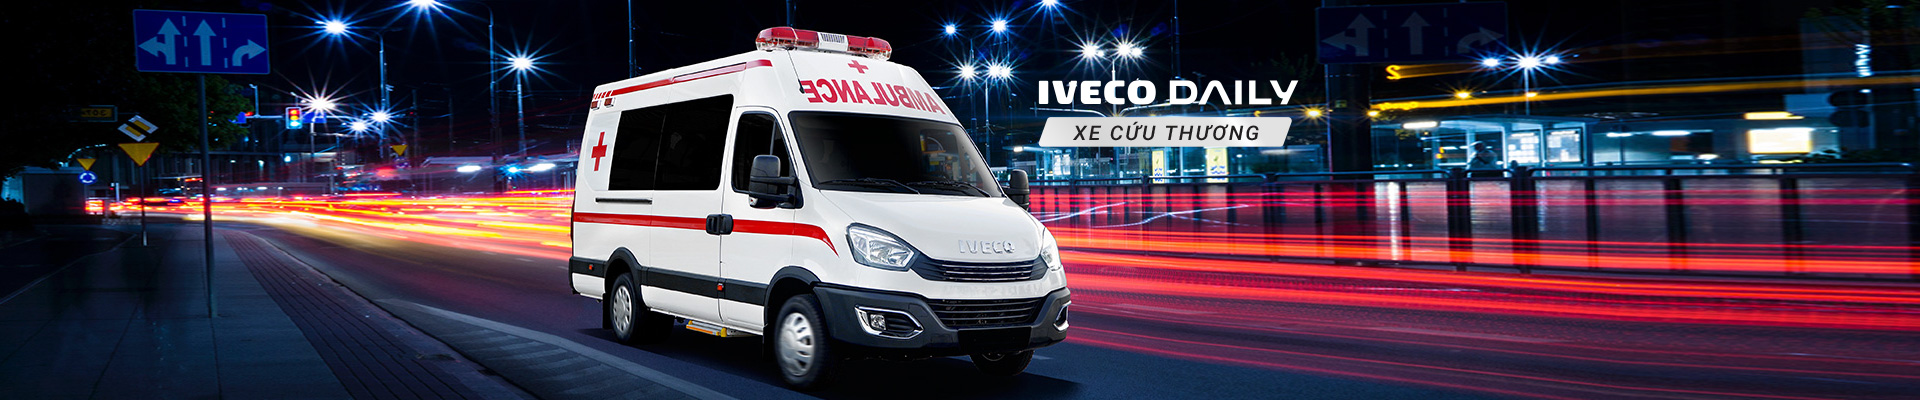 banner_ivecodaily_xecuuthuong